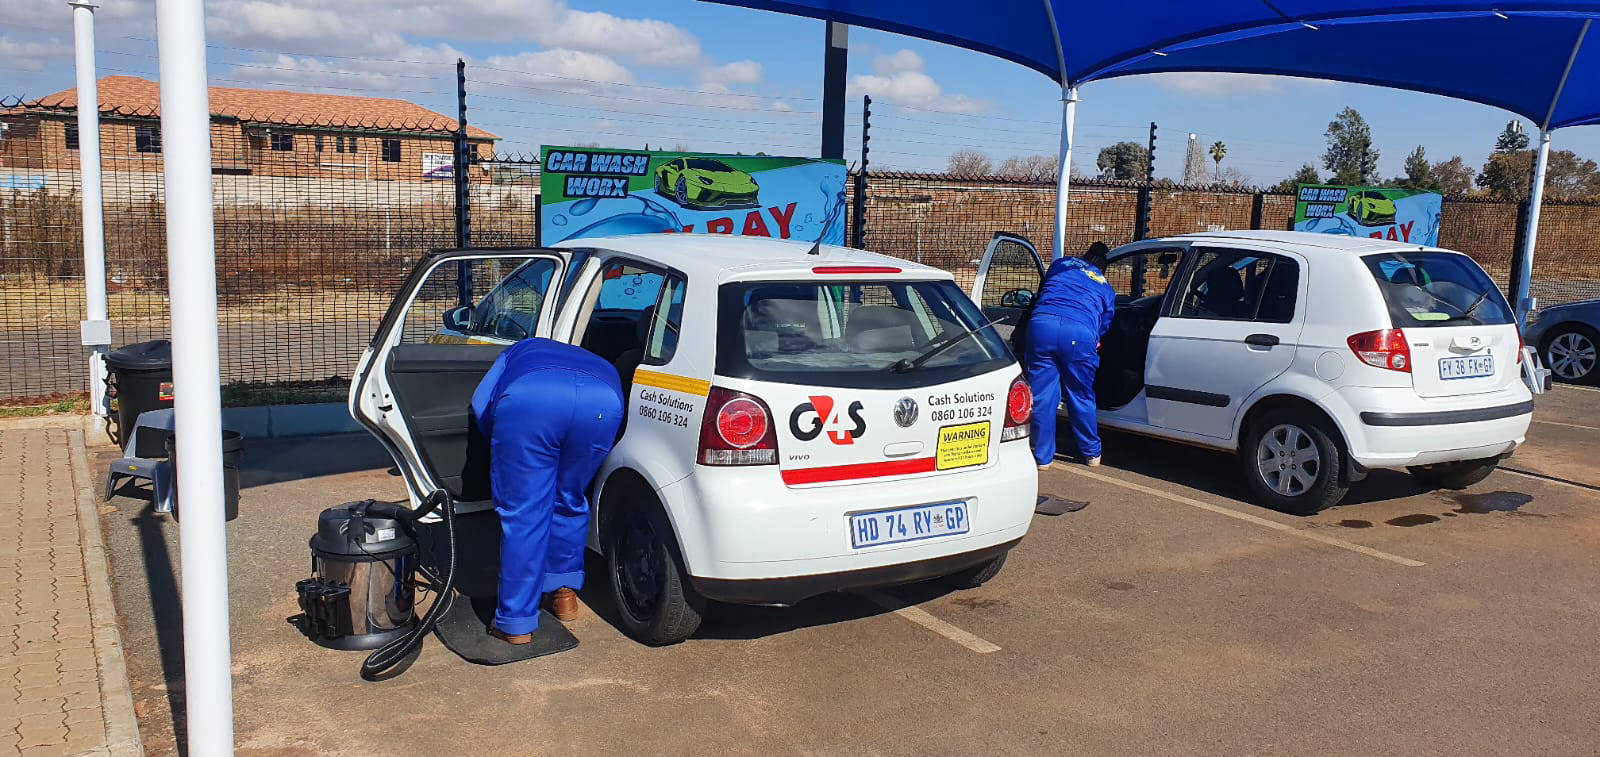 CarWash Worx Dawn Park Branch, Car Wash Franchises Available, CarWash Worx Head Office, Join The Leading Car Wash Franchising Group, Start Your Own Successful Car Wash Business Now